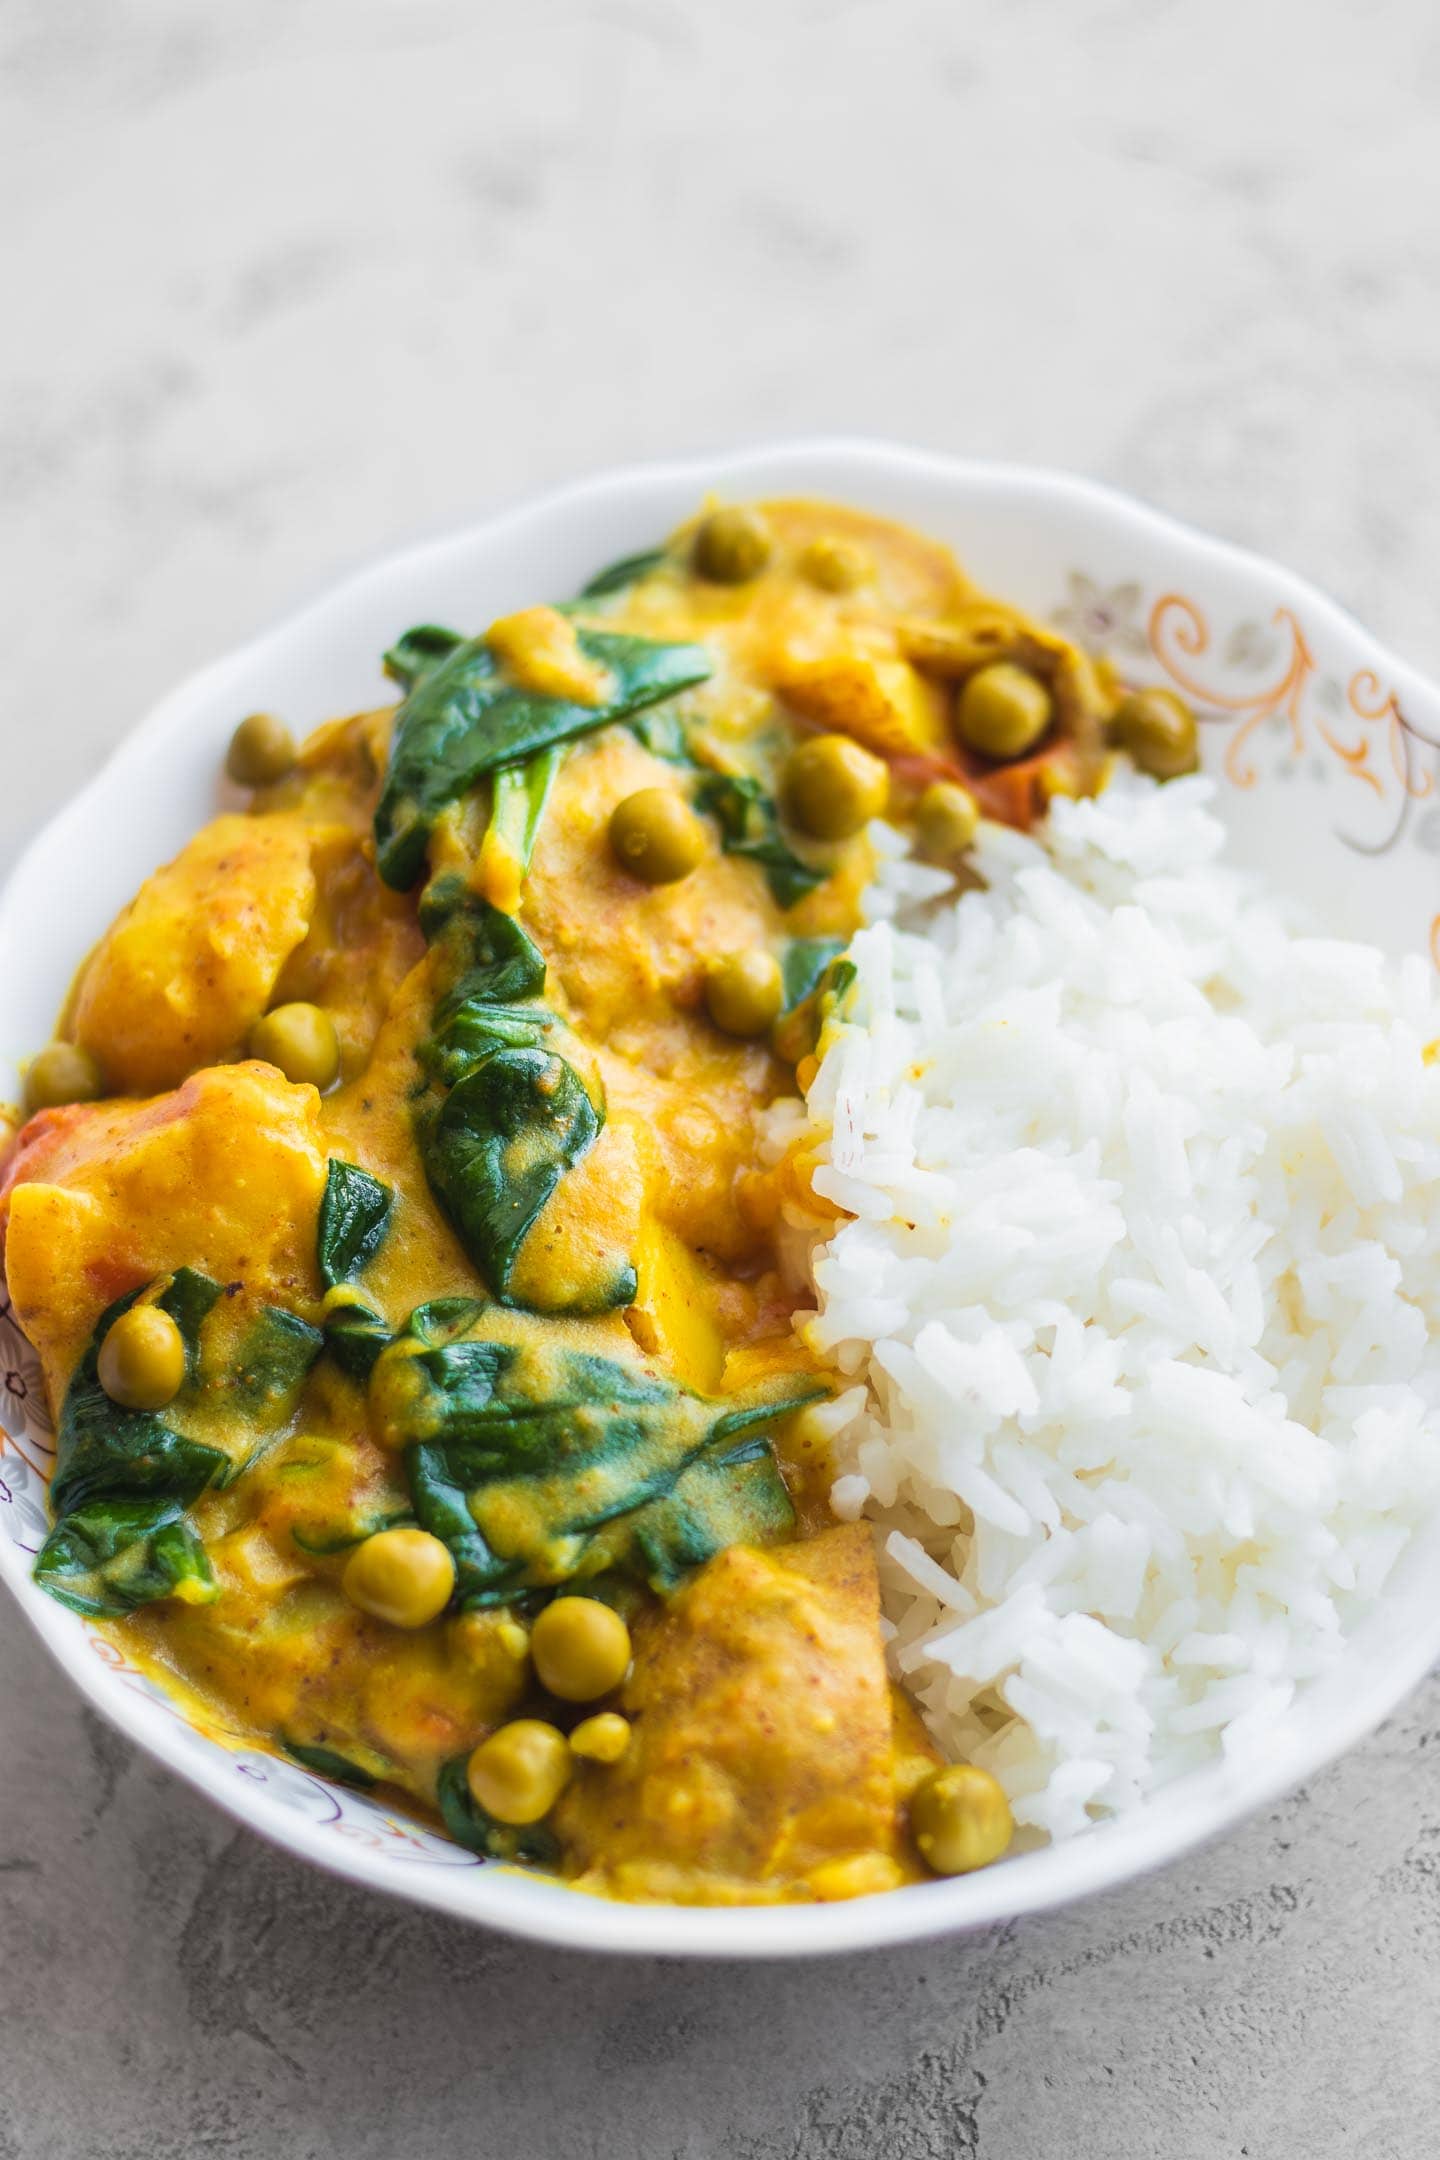 Bowl with vegan curry and rice